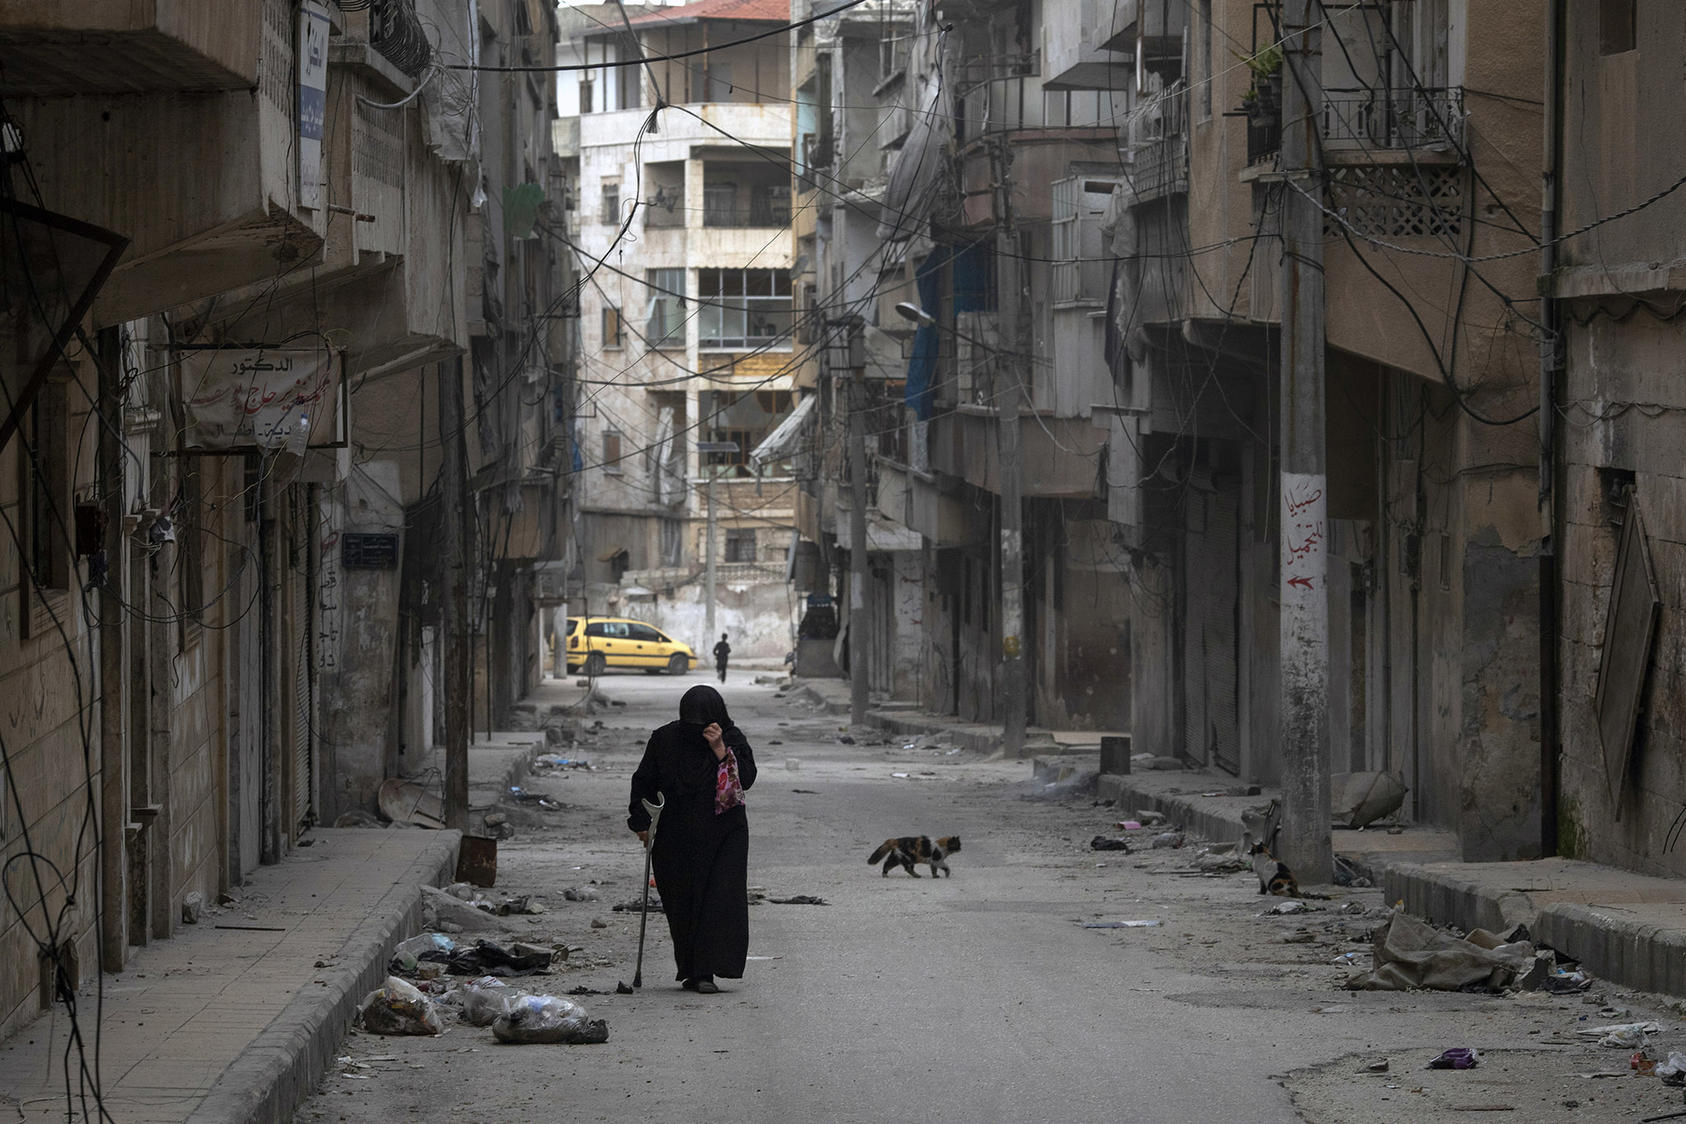 A woman walks down a street in Ariha, in Idlib Province, Syria, on March 12, 2020. (Tyler Hicks/The New York Times)